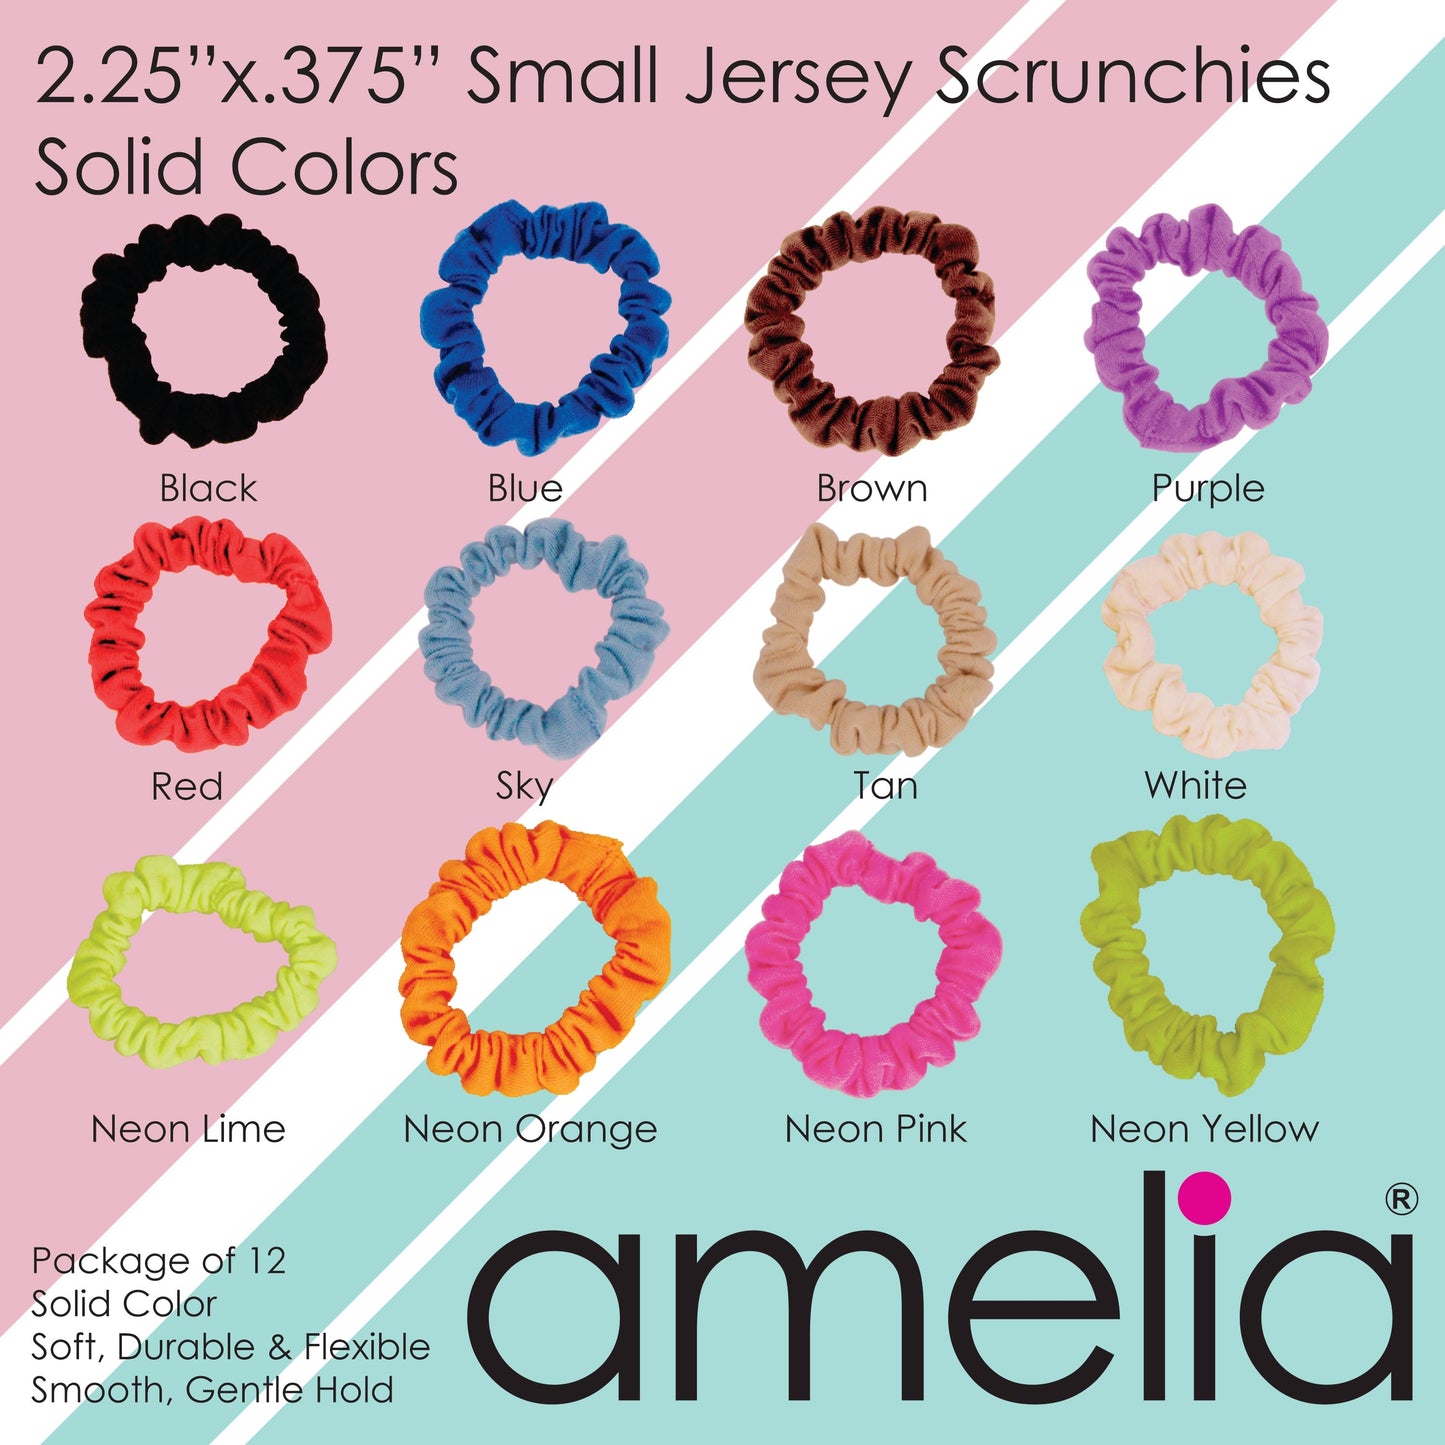 Amelia Beauty, Sky Jersey Scrunchies, 2.25in Diameter, Gentle on Hair, Strong Hold, No Snag, No Dents or Creases. 12 Pack - 12 Retail Packs